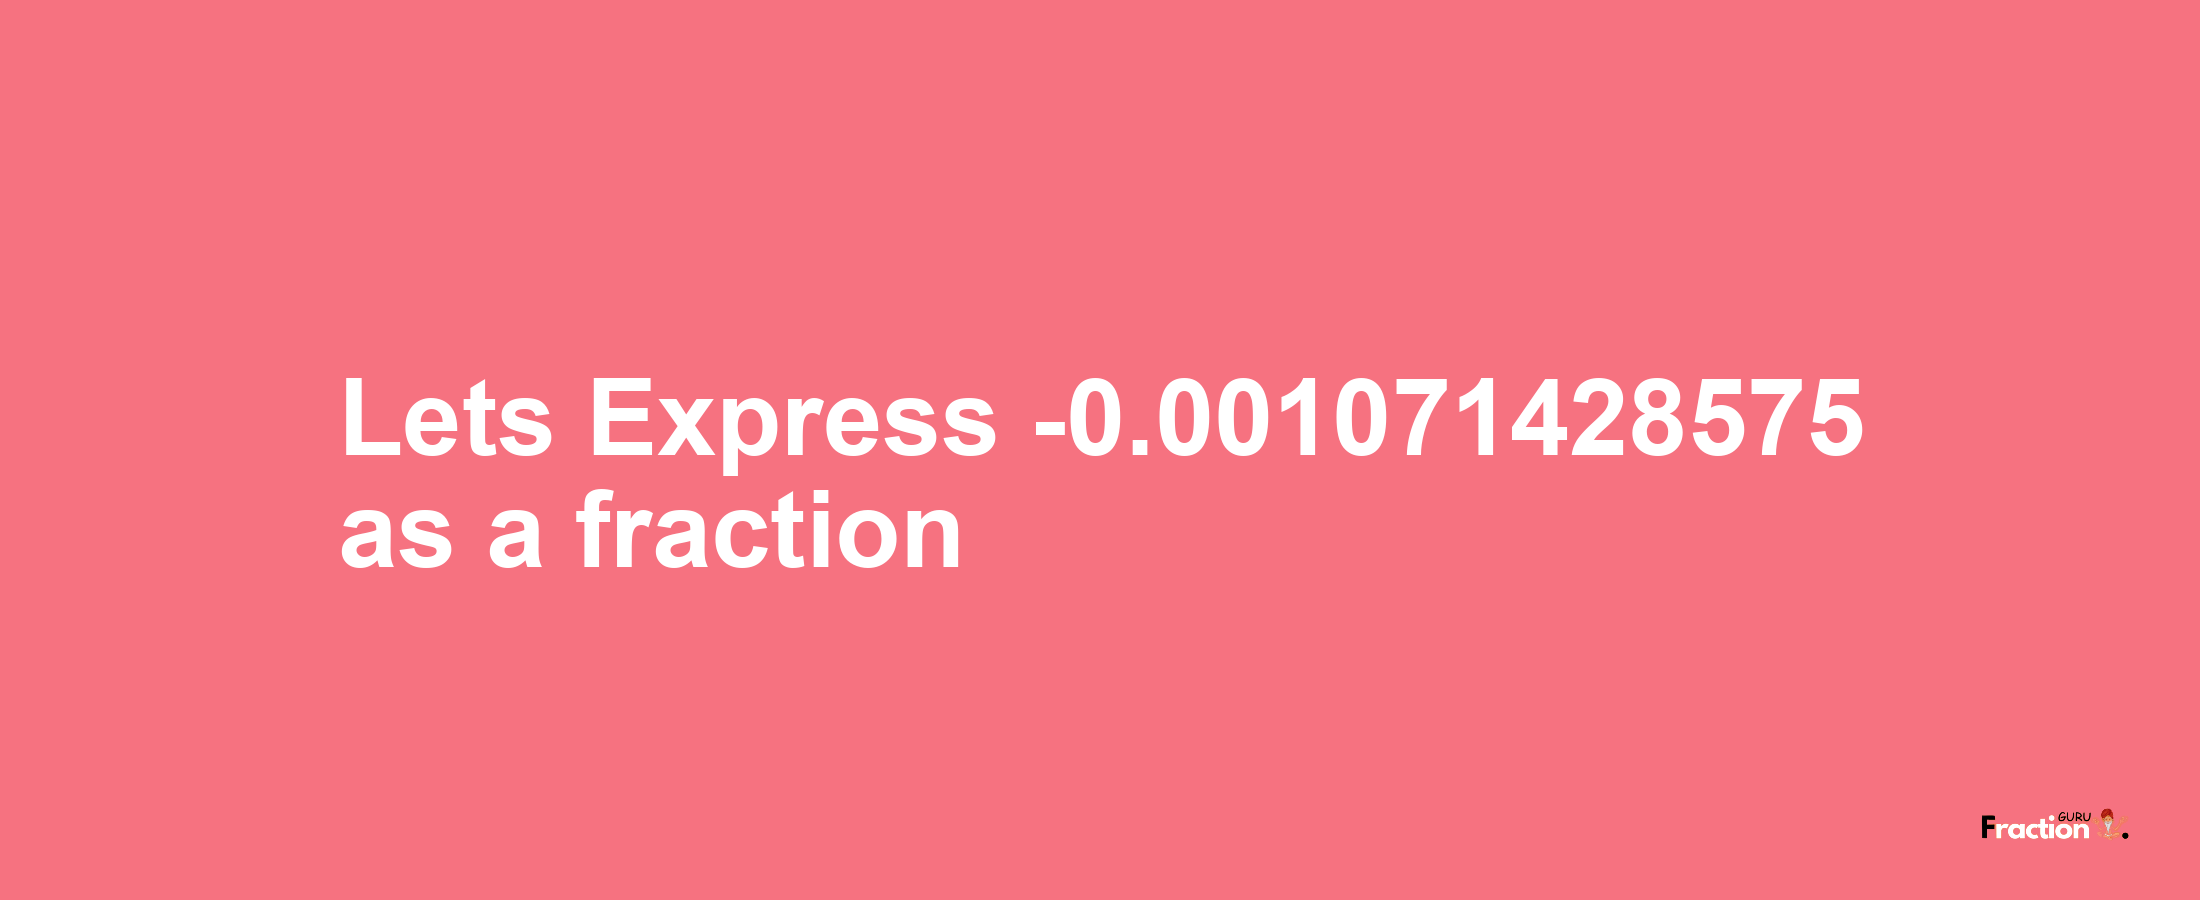 Lets Express -0.001071428575 as afraction